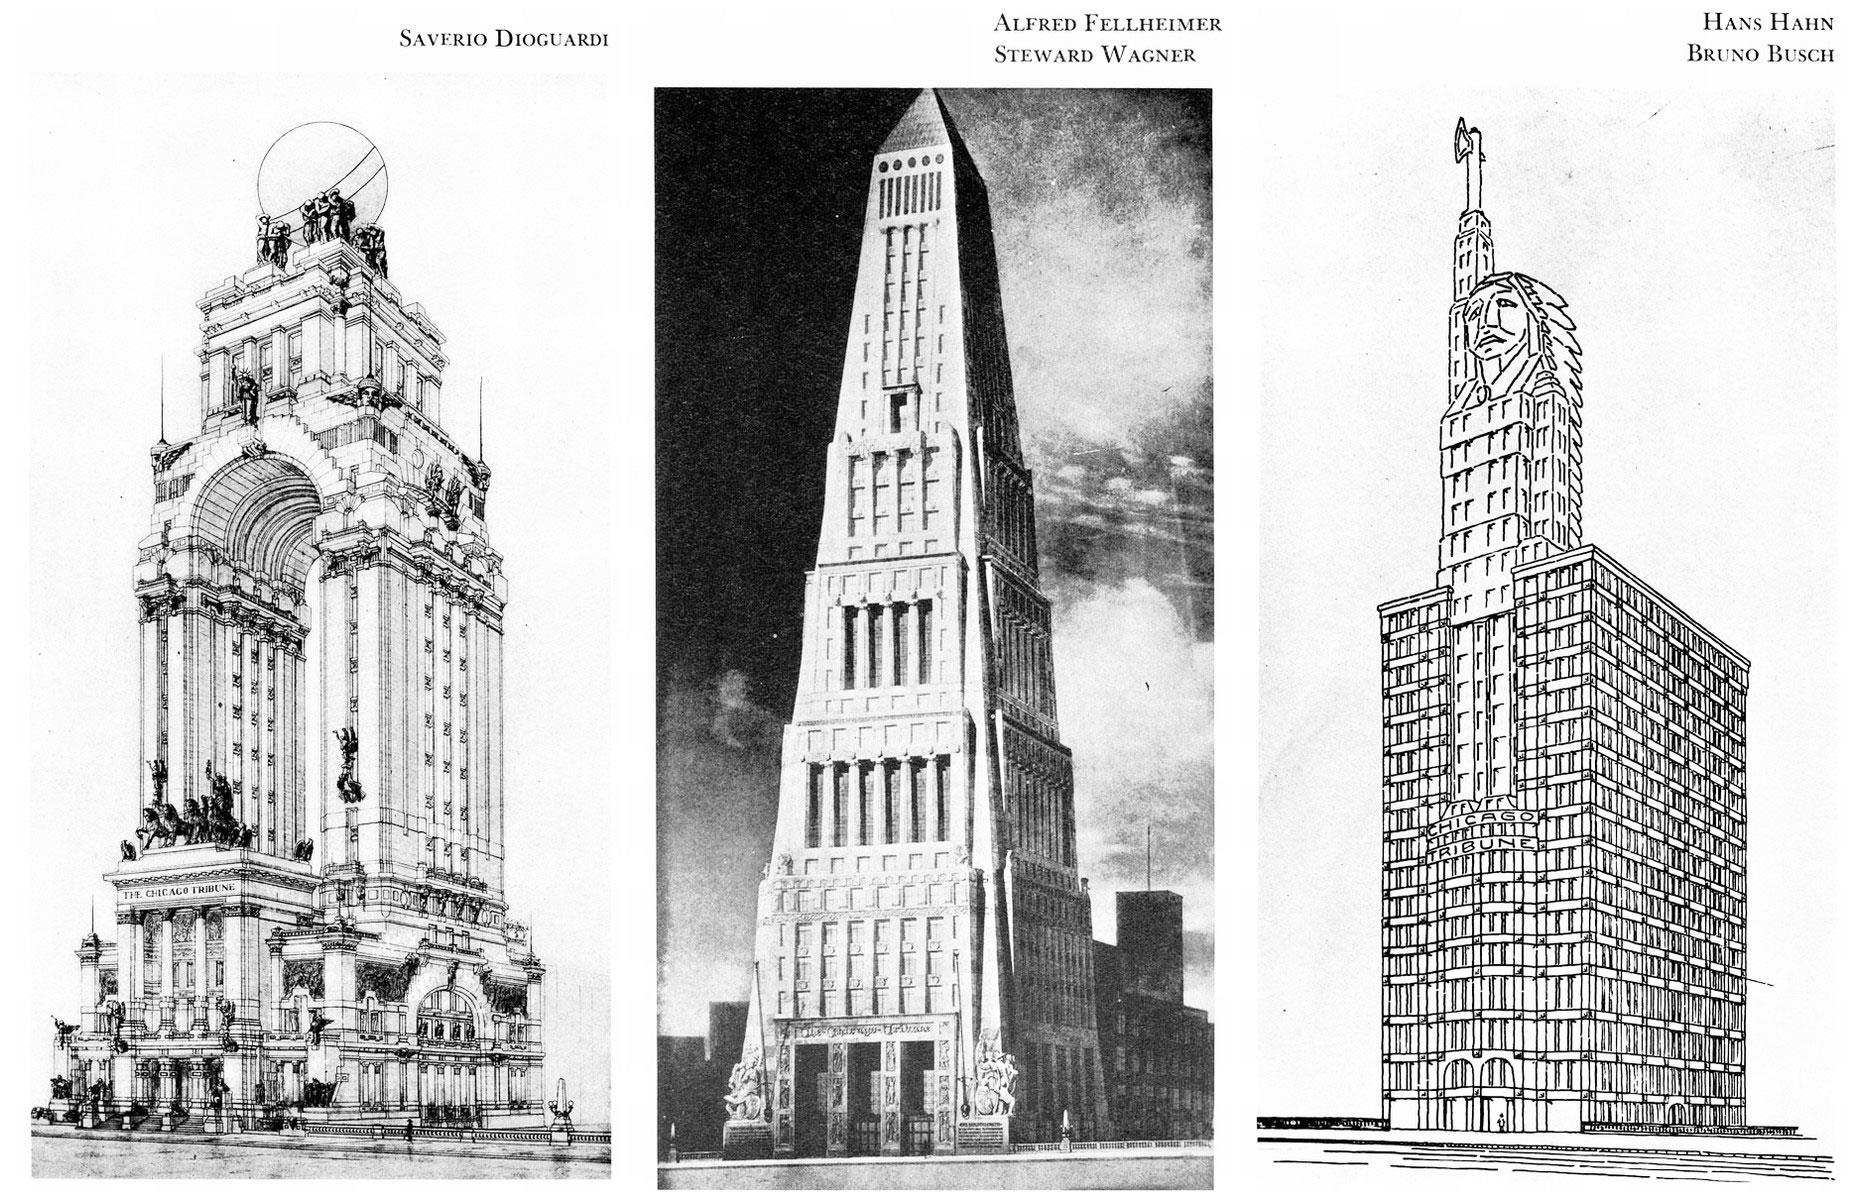 Hood and Howells' Neo-gothic design was one of 259 entries in an international competition launched in 1922 to create a new HQ for the Chicago Tribune newspaper. Some of the more outlandish entries included an arched building crowned by a globe, an Art Deco pyramid and a skyscraper featuring the head of a Native American chief.